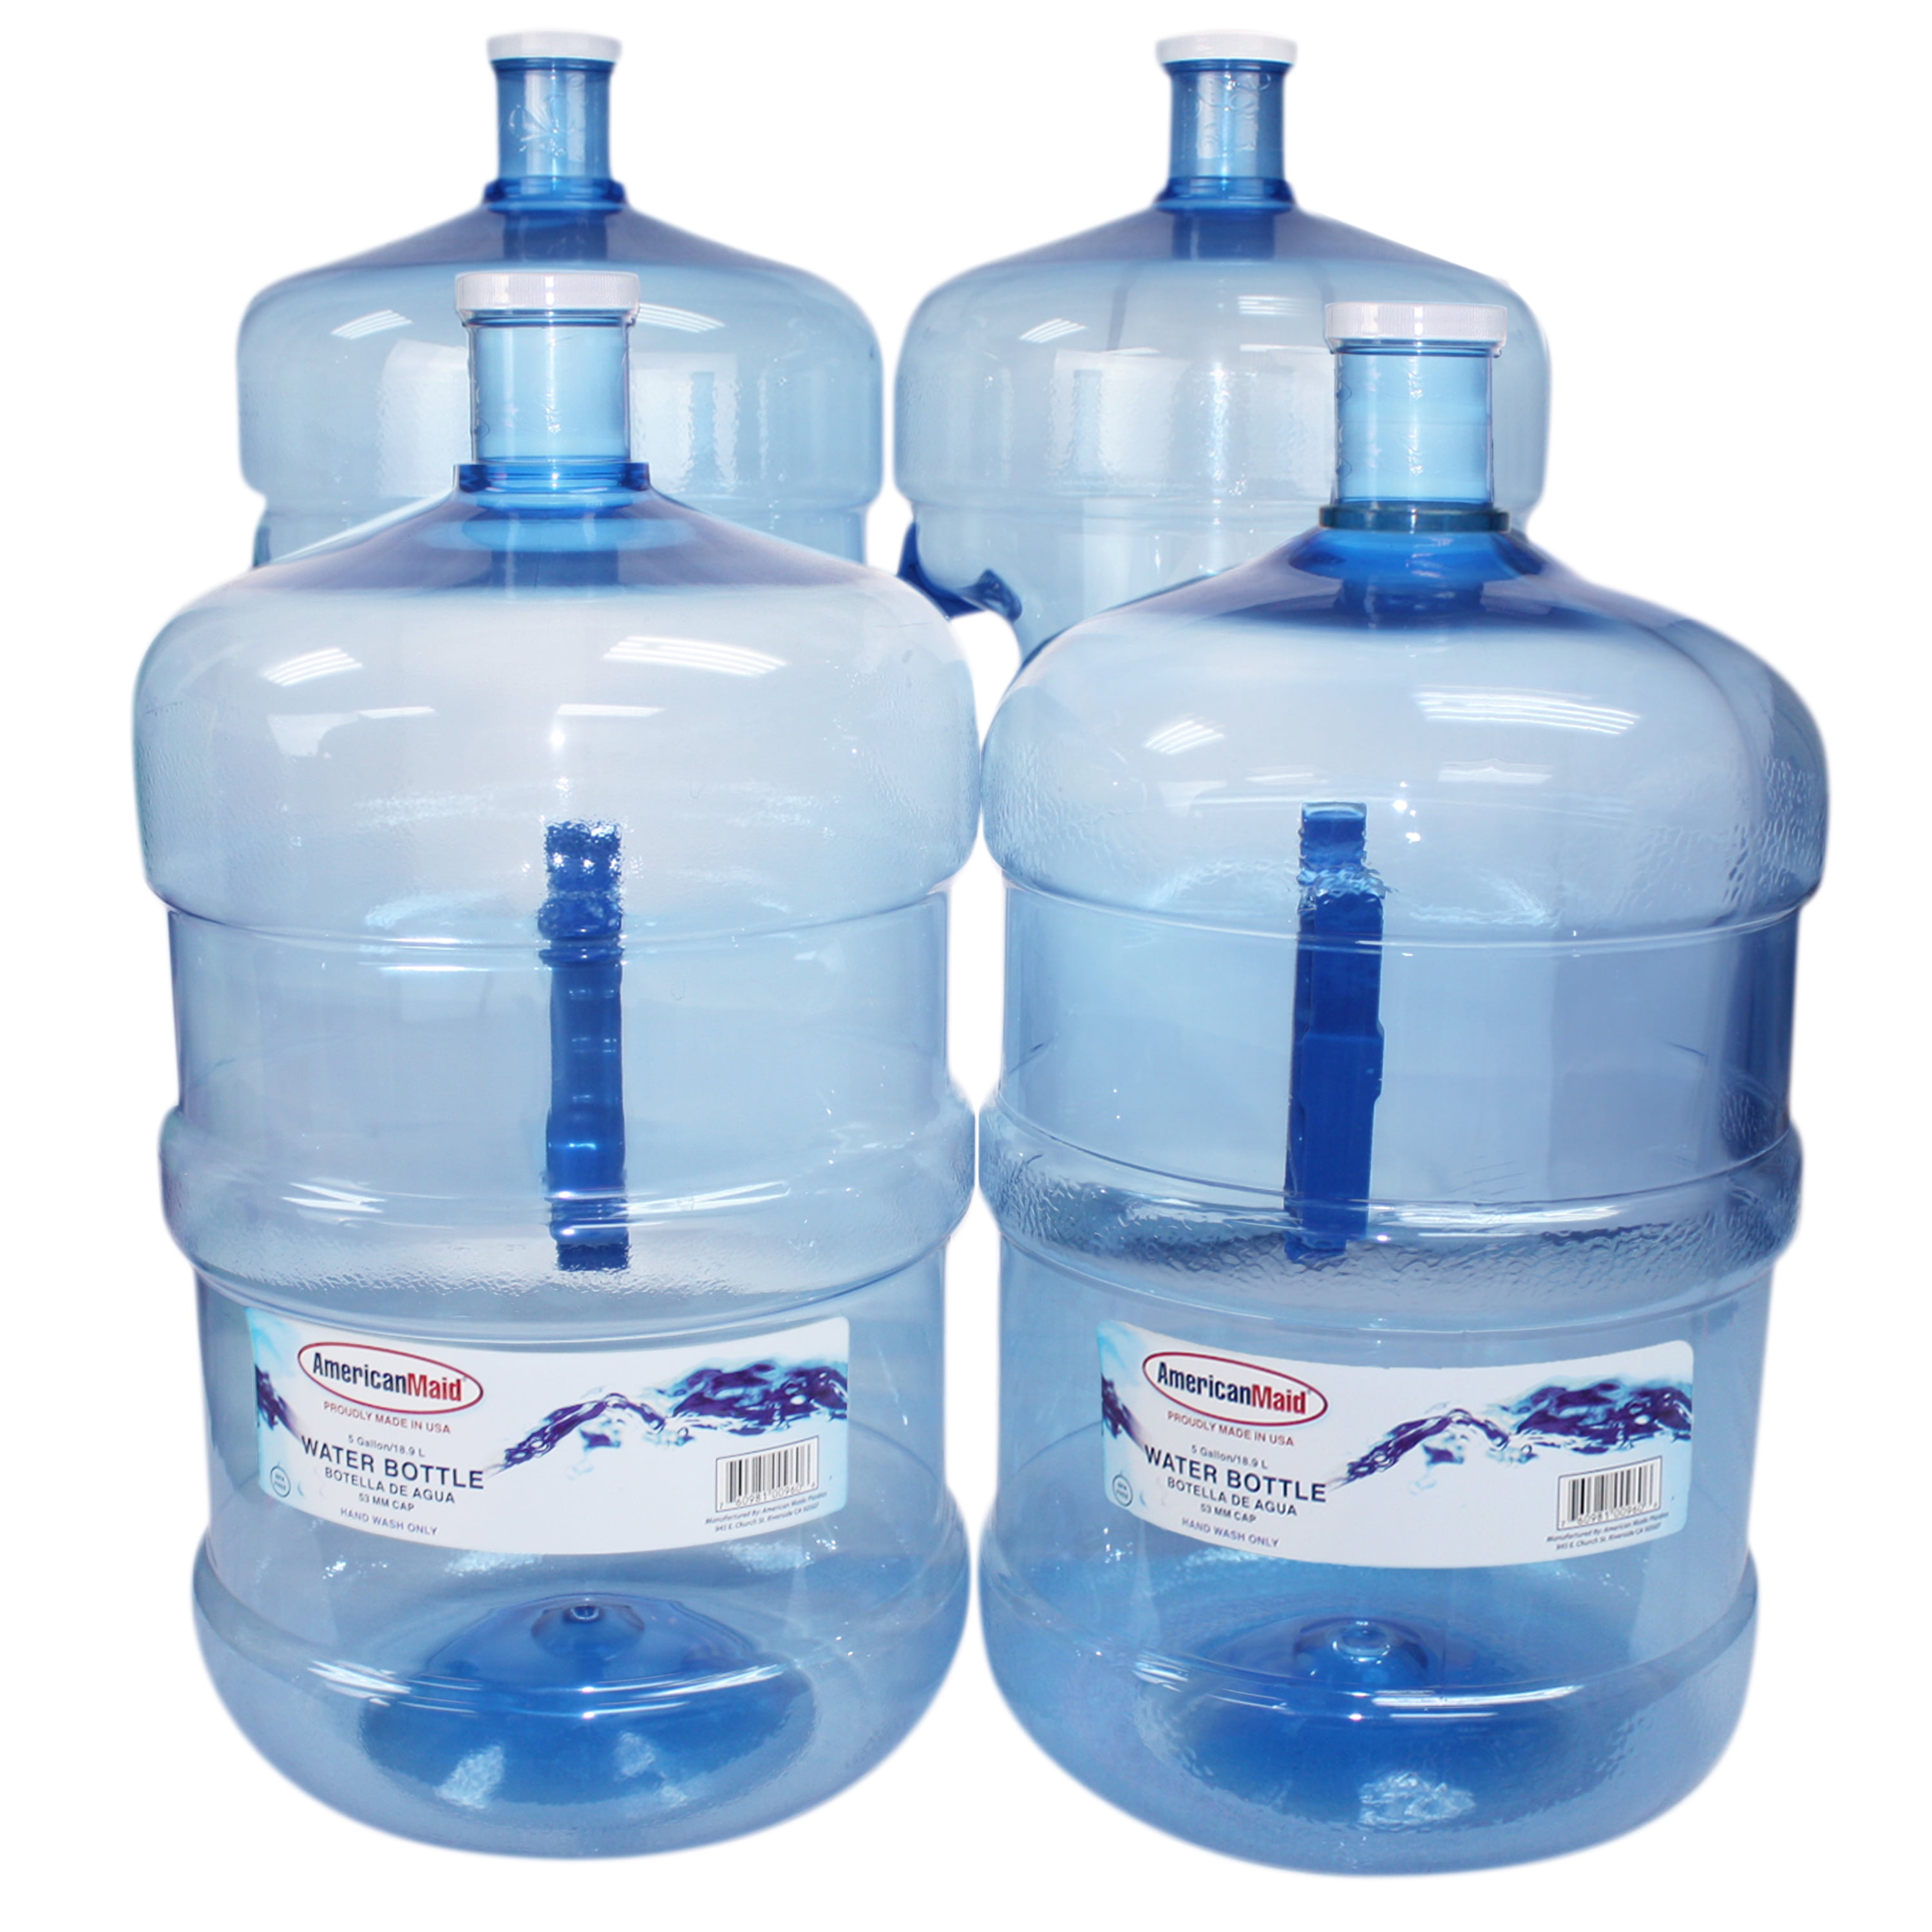 American Maid 5 Gallon/640 fl oz Water Bottle, Set of 4 (Not